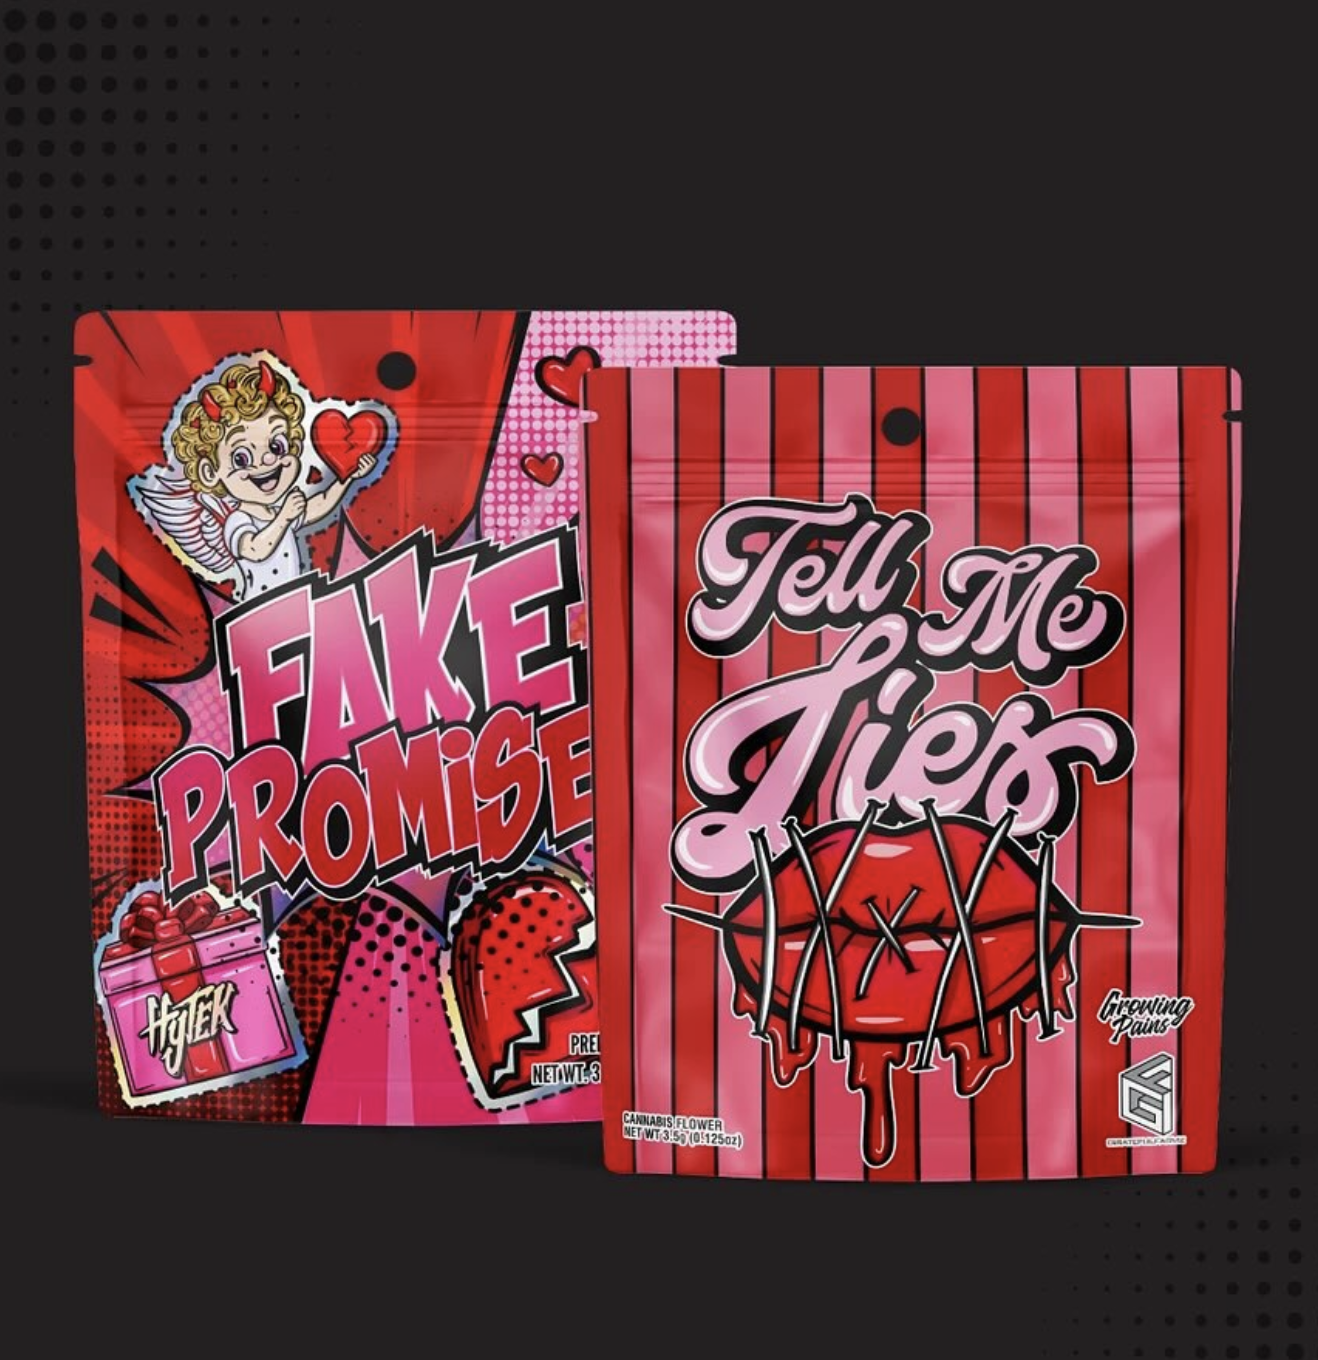 image from Review (x2): Hytek - Fake Promises (Gelonade) & Growing Pains - Tell Me Lies (Devils Candy)